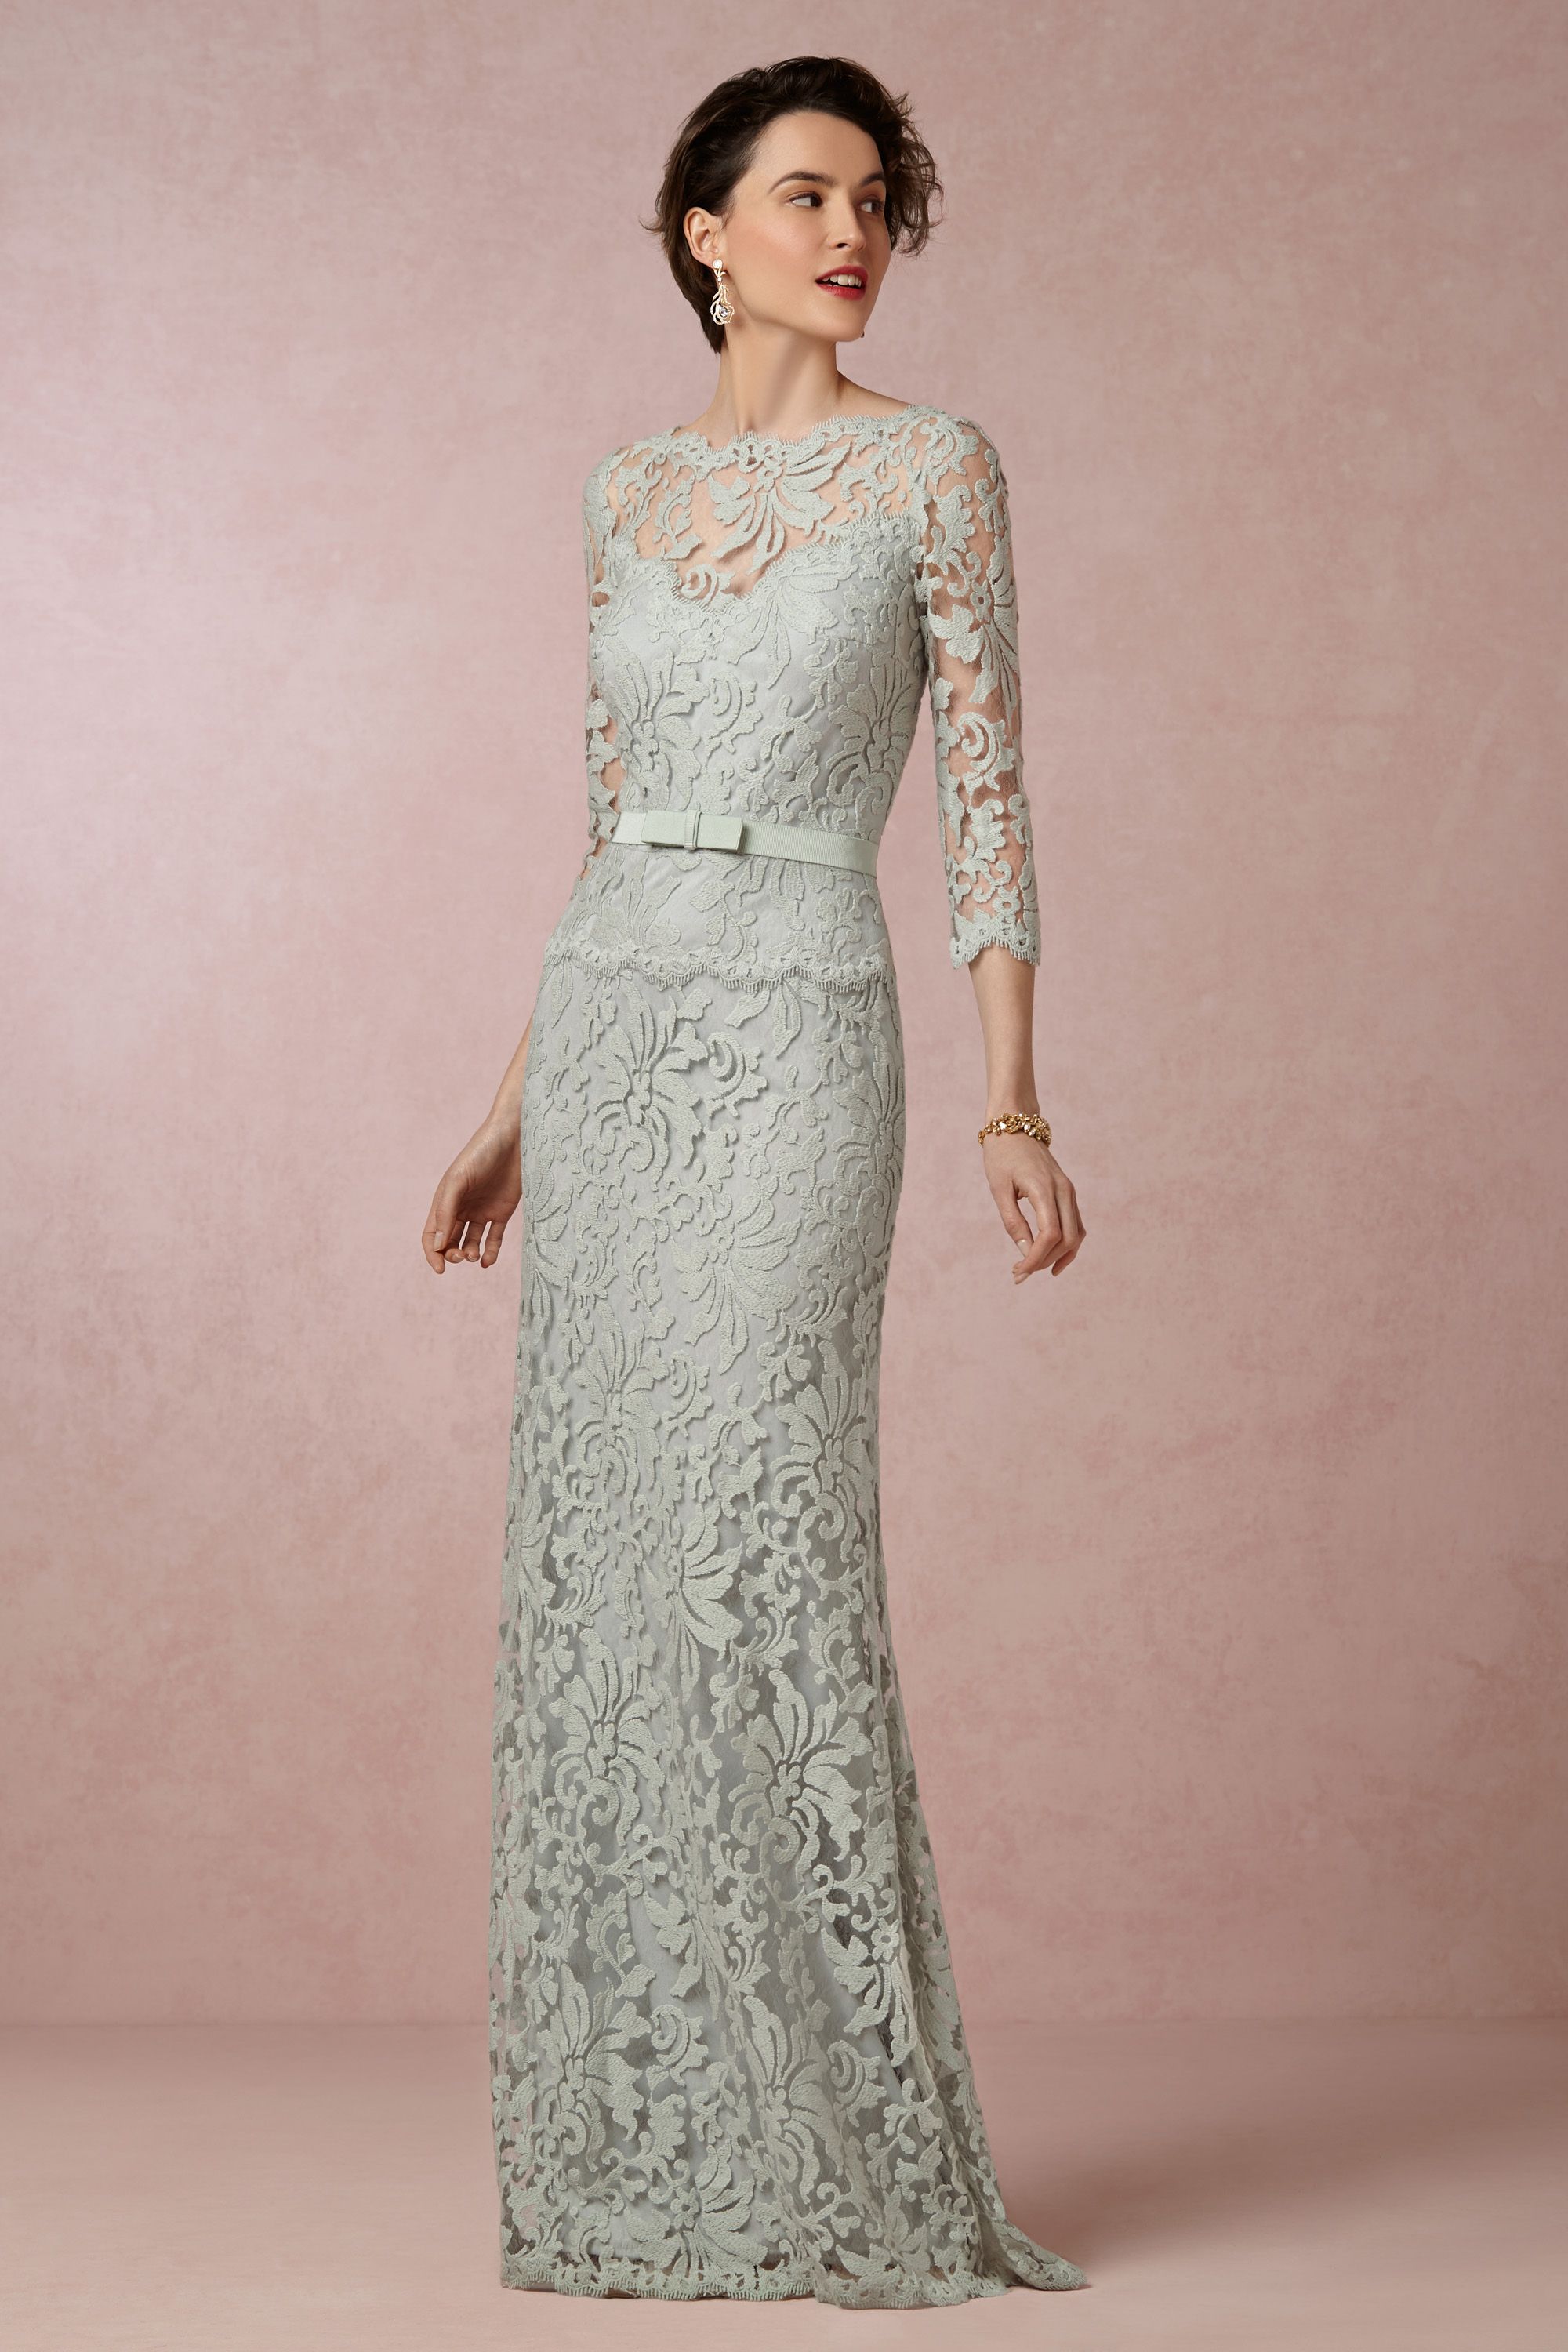 saks fifth mother of the bride dresses